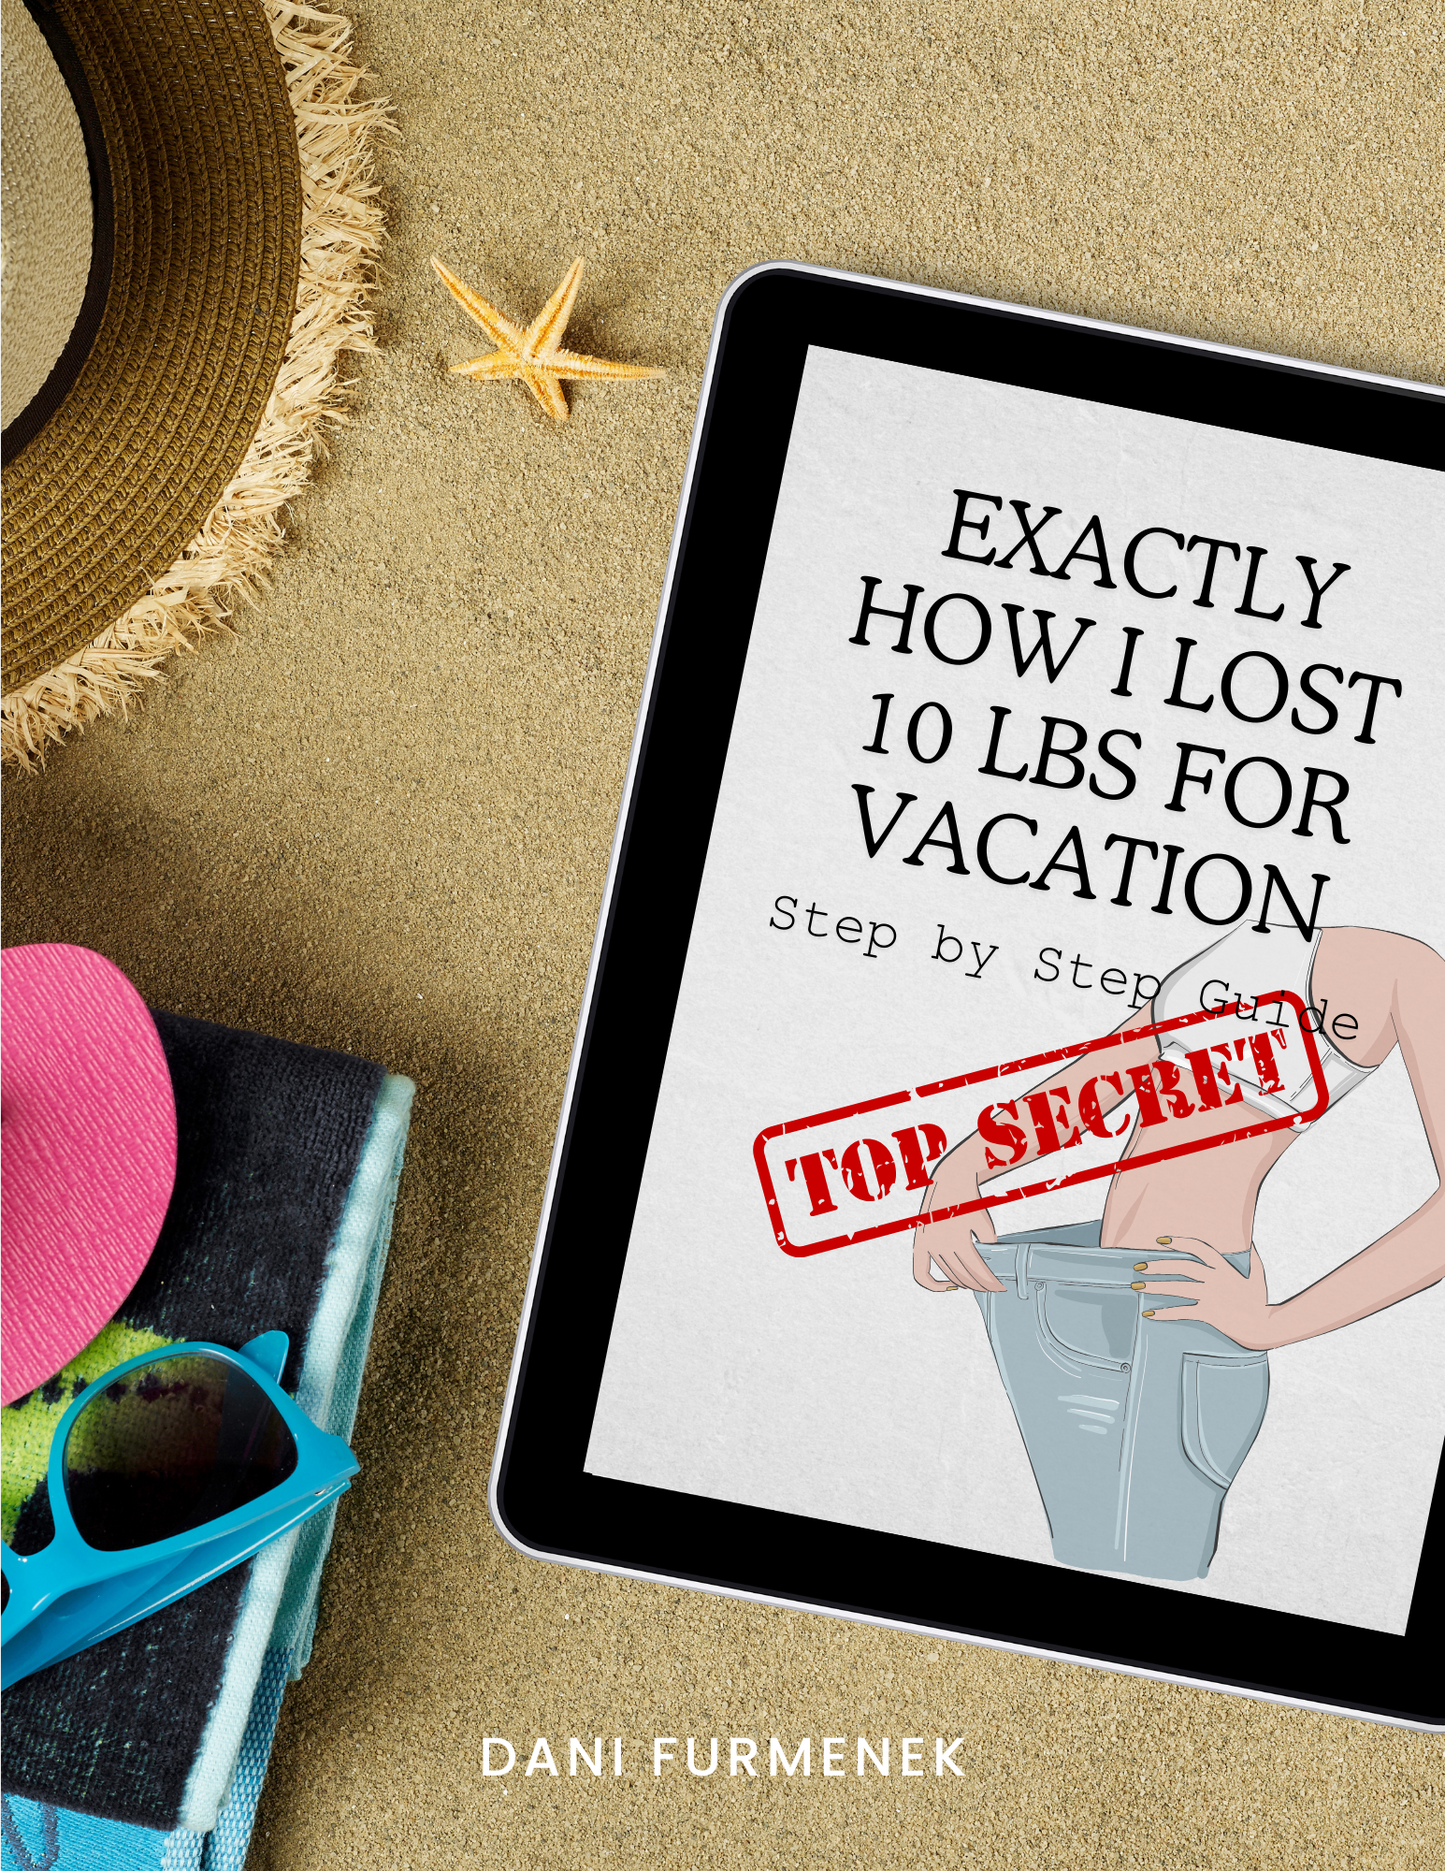 Exactly How I Lost 10 Pounds For Vacation